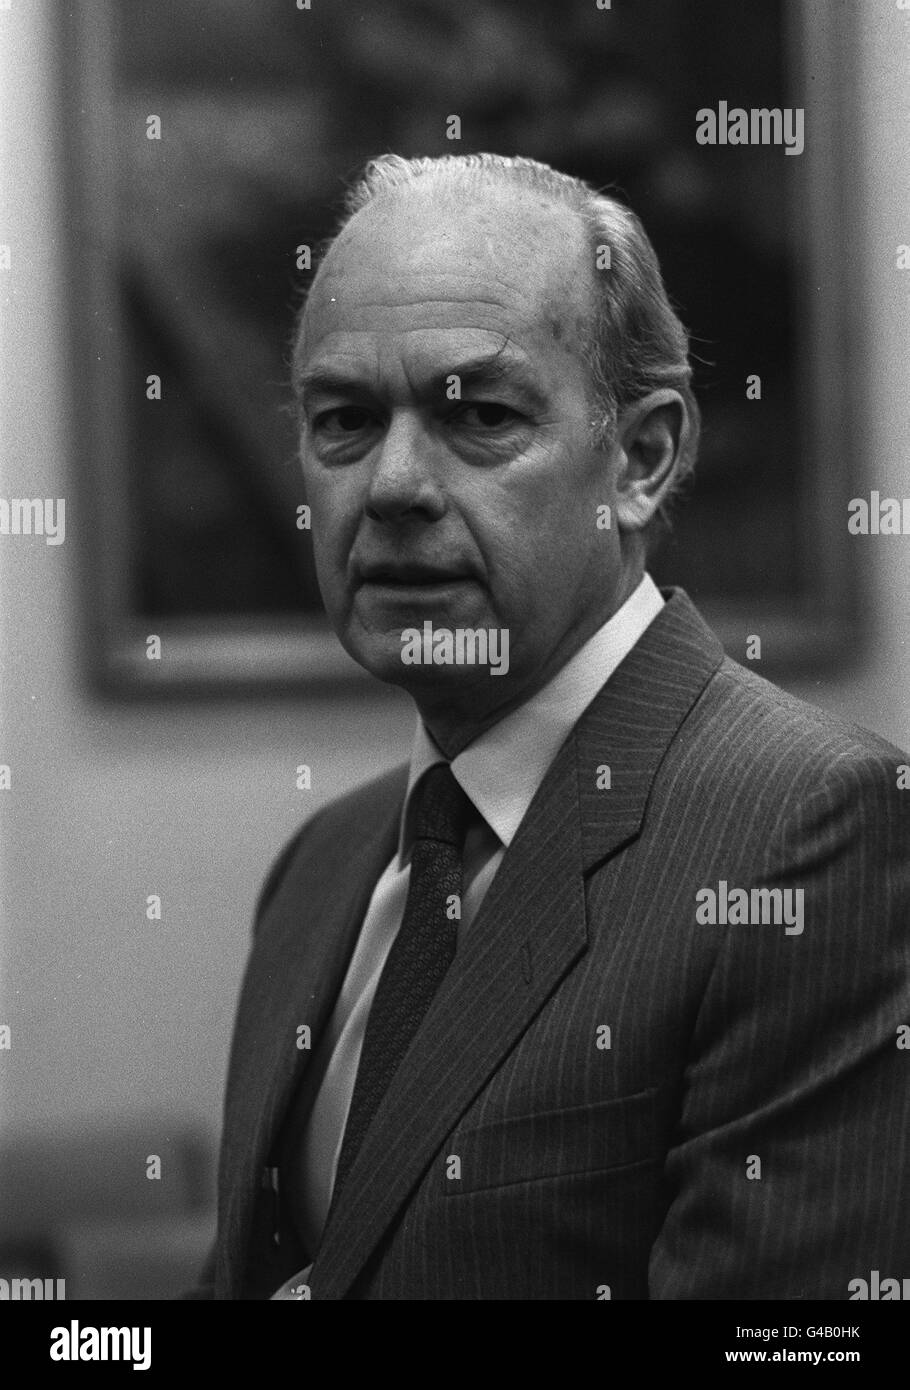 PA NEWS PHOTO 15/1/85 RAMSAY MELHUISH (52 YEARS OLD) THE BRITISH HIGH COMMISSIONER TO ZIMBABWE AT THE FOREIGN AND COMMONWEALTH OFFICE IN LONDON. Stock Photo